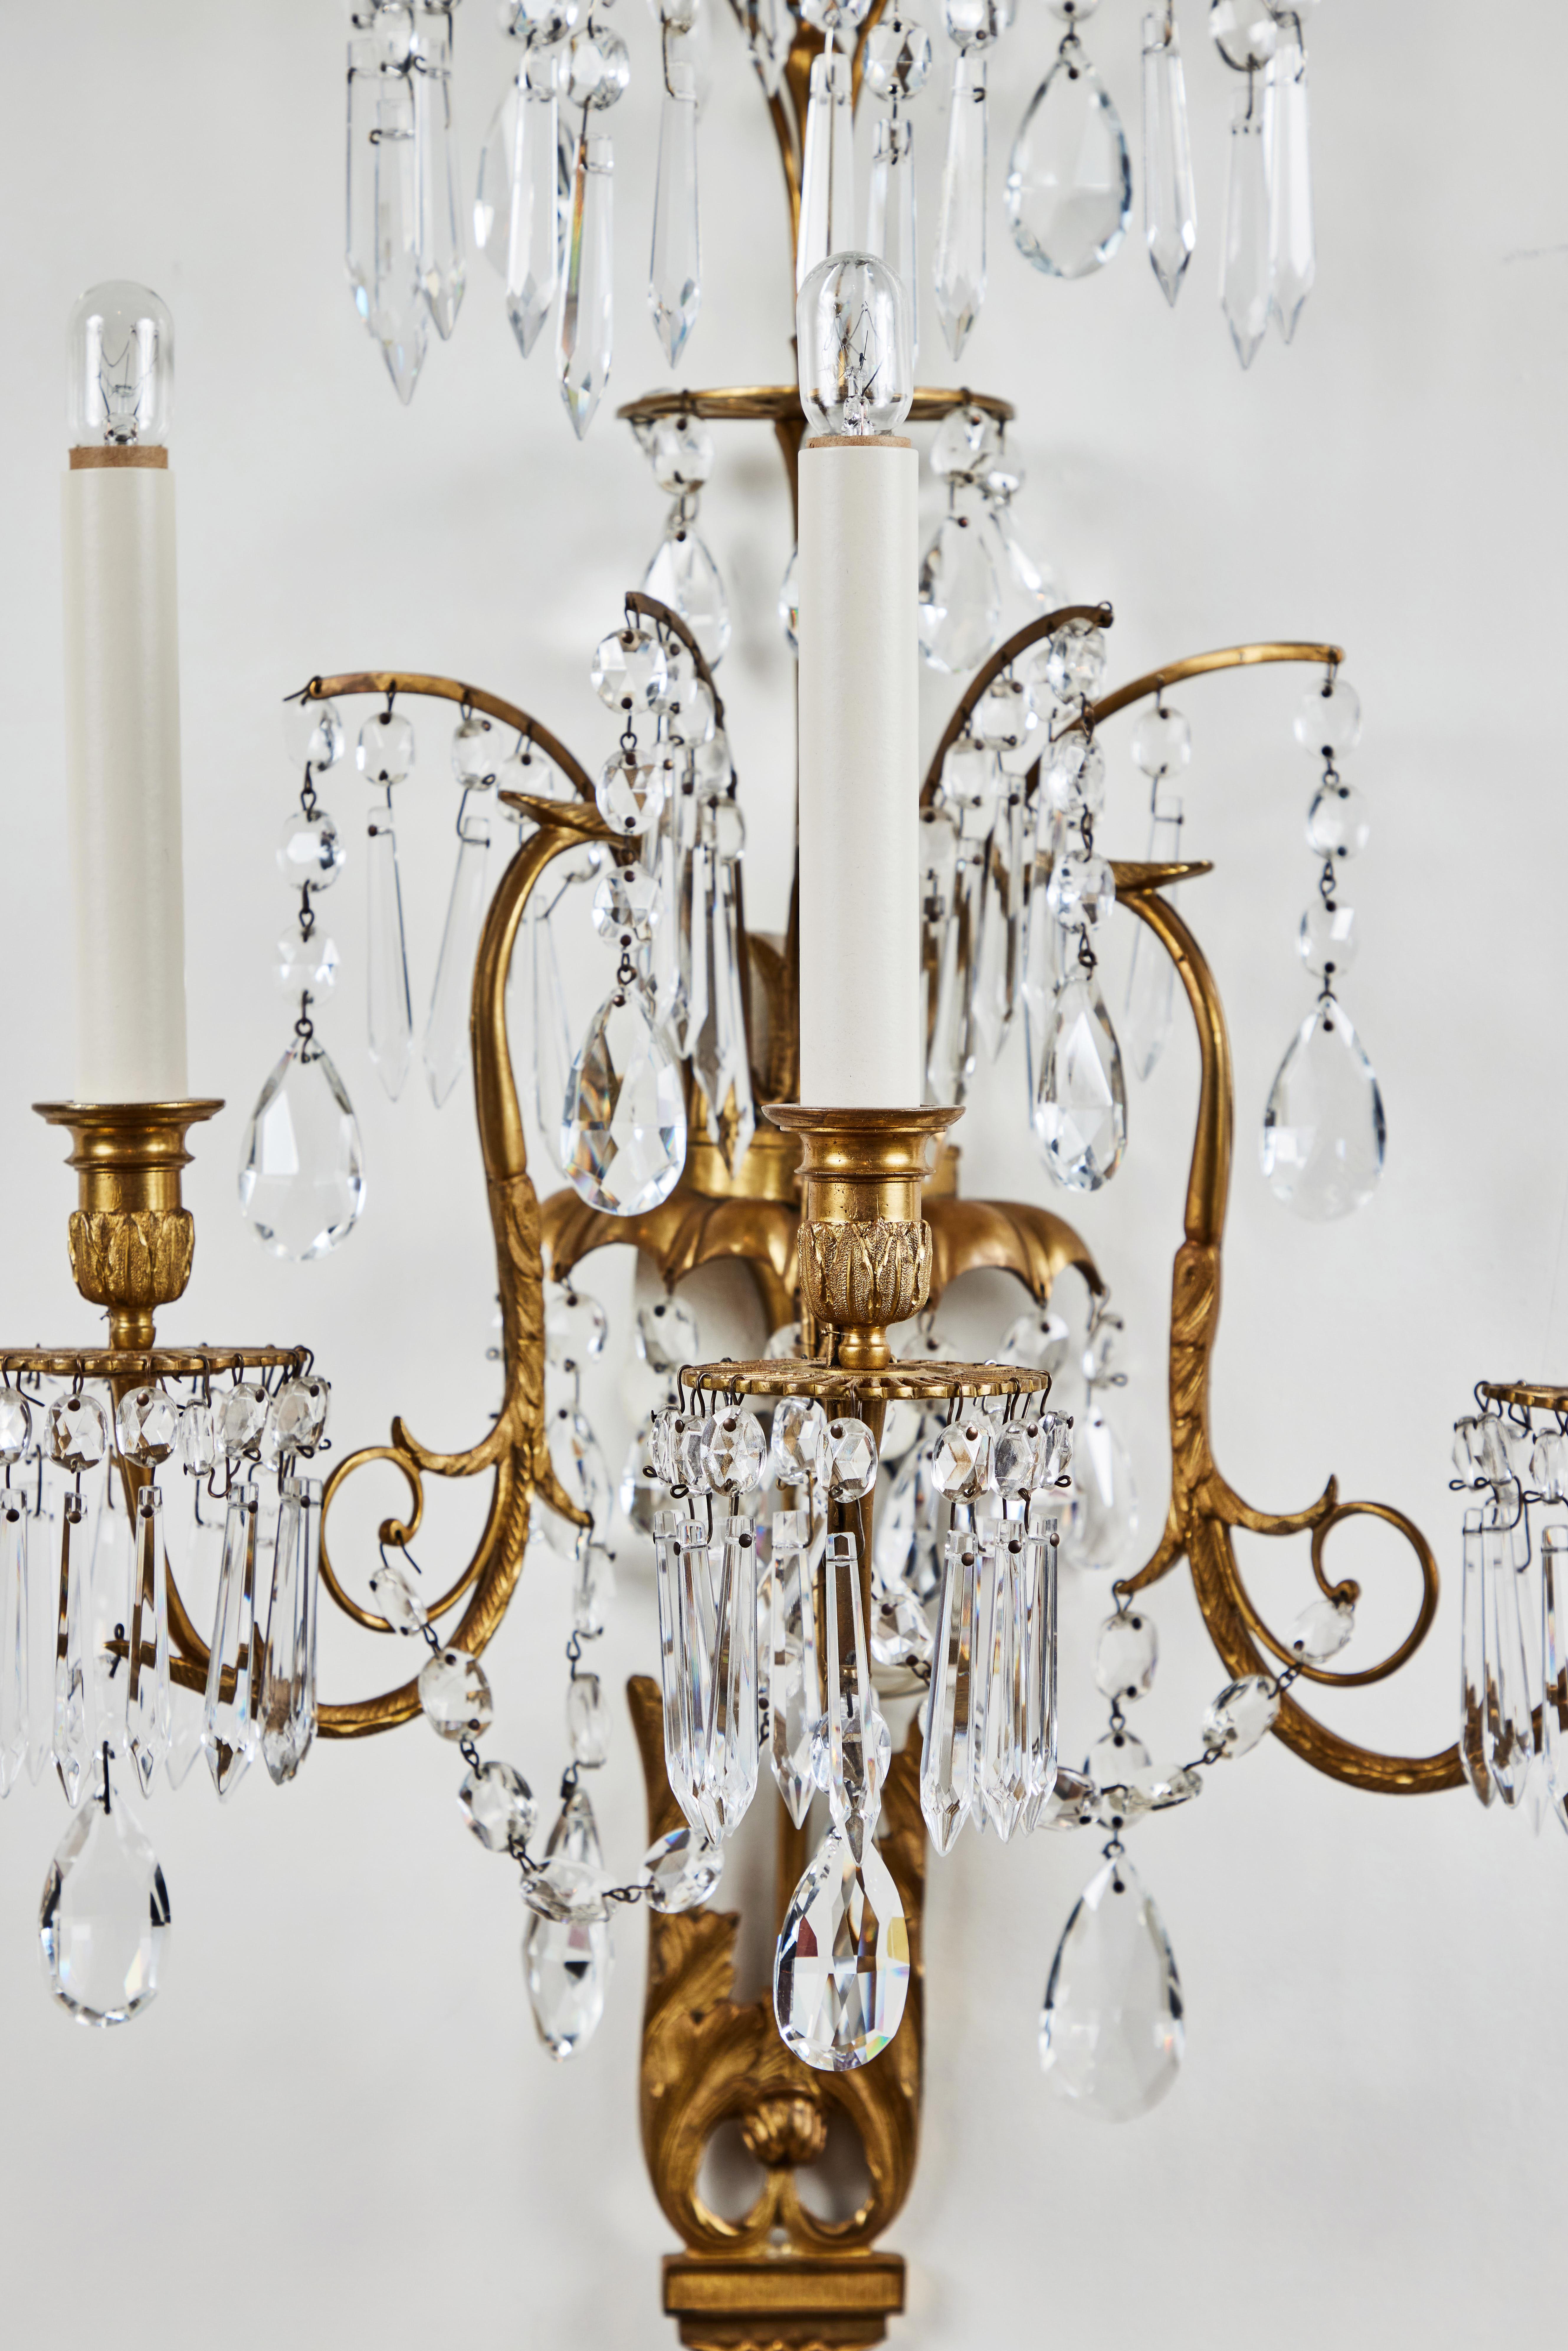 Mid-20th Century Suite of Russian, Cut Crystal Sconces For Sale